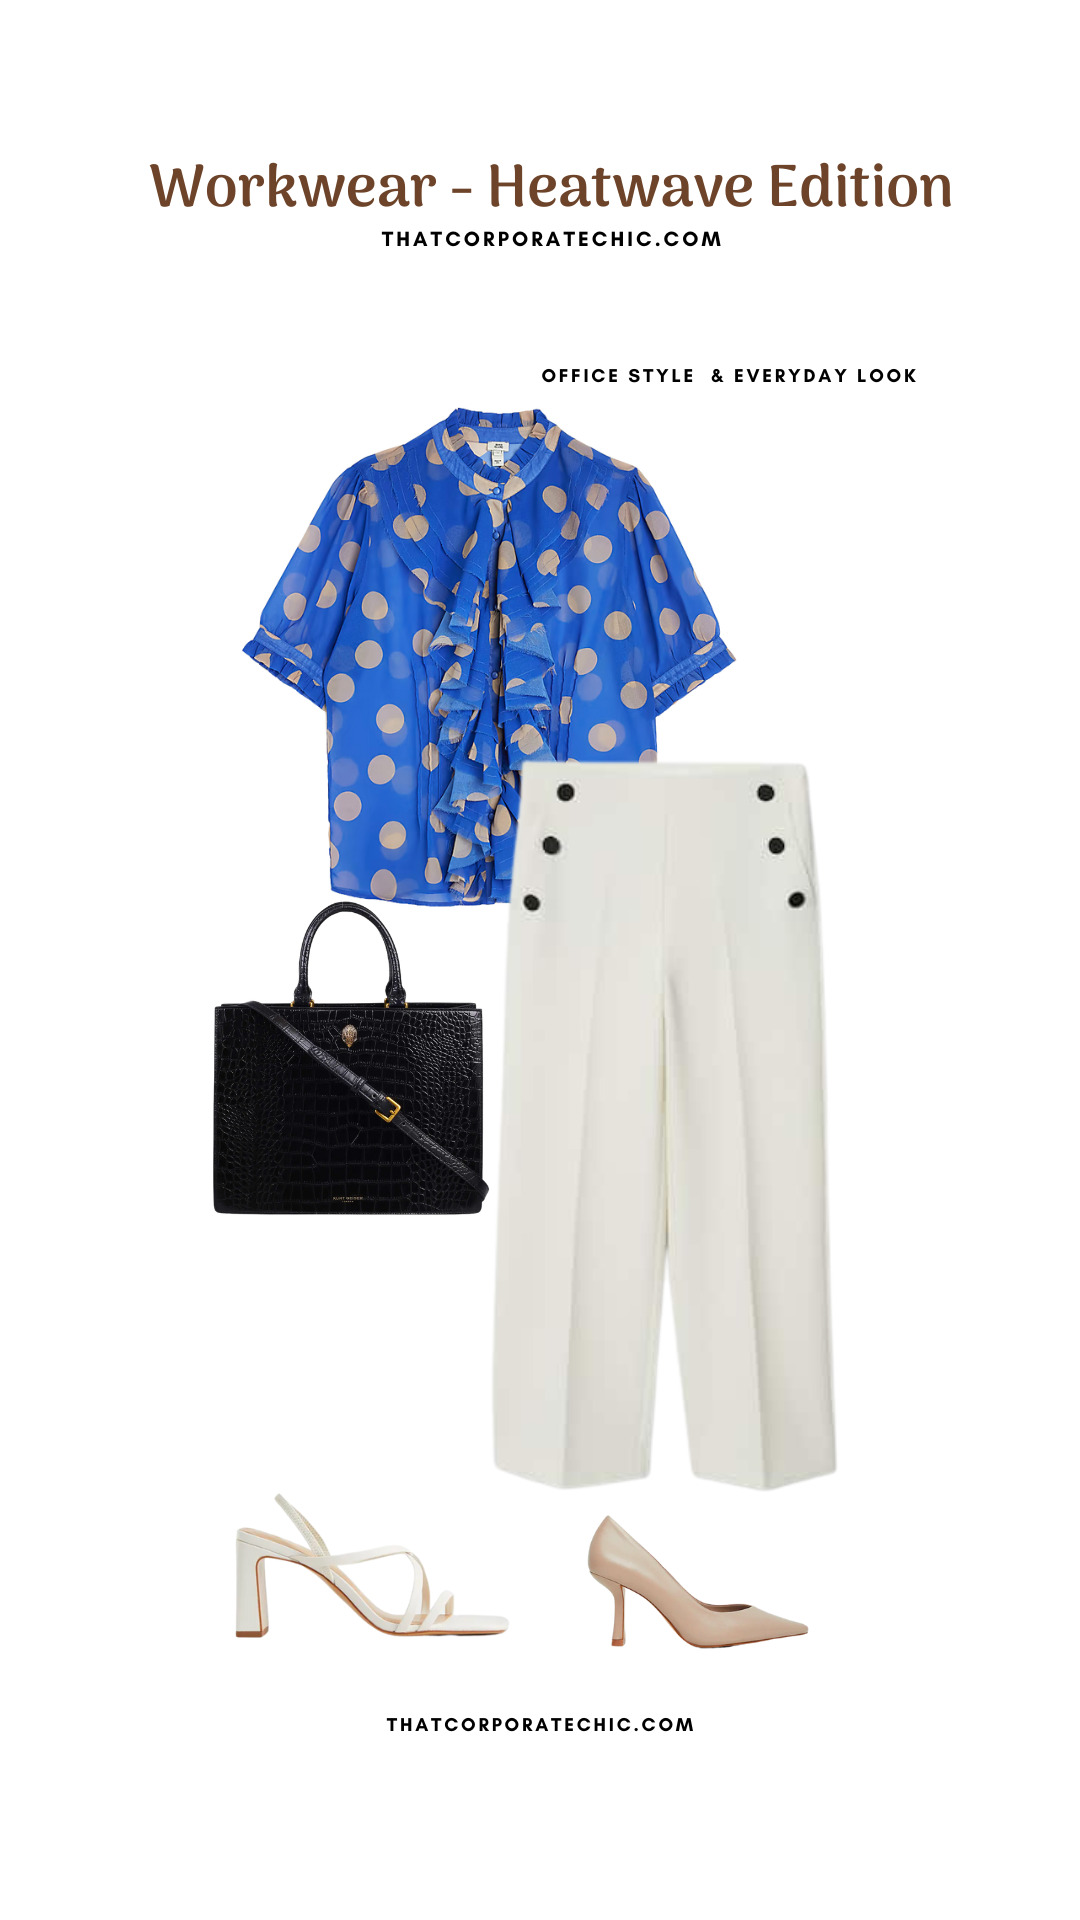 What to wear to the office during a heatwave - Workwear edit